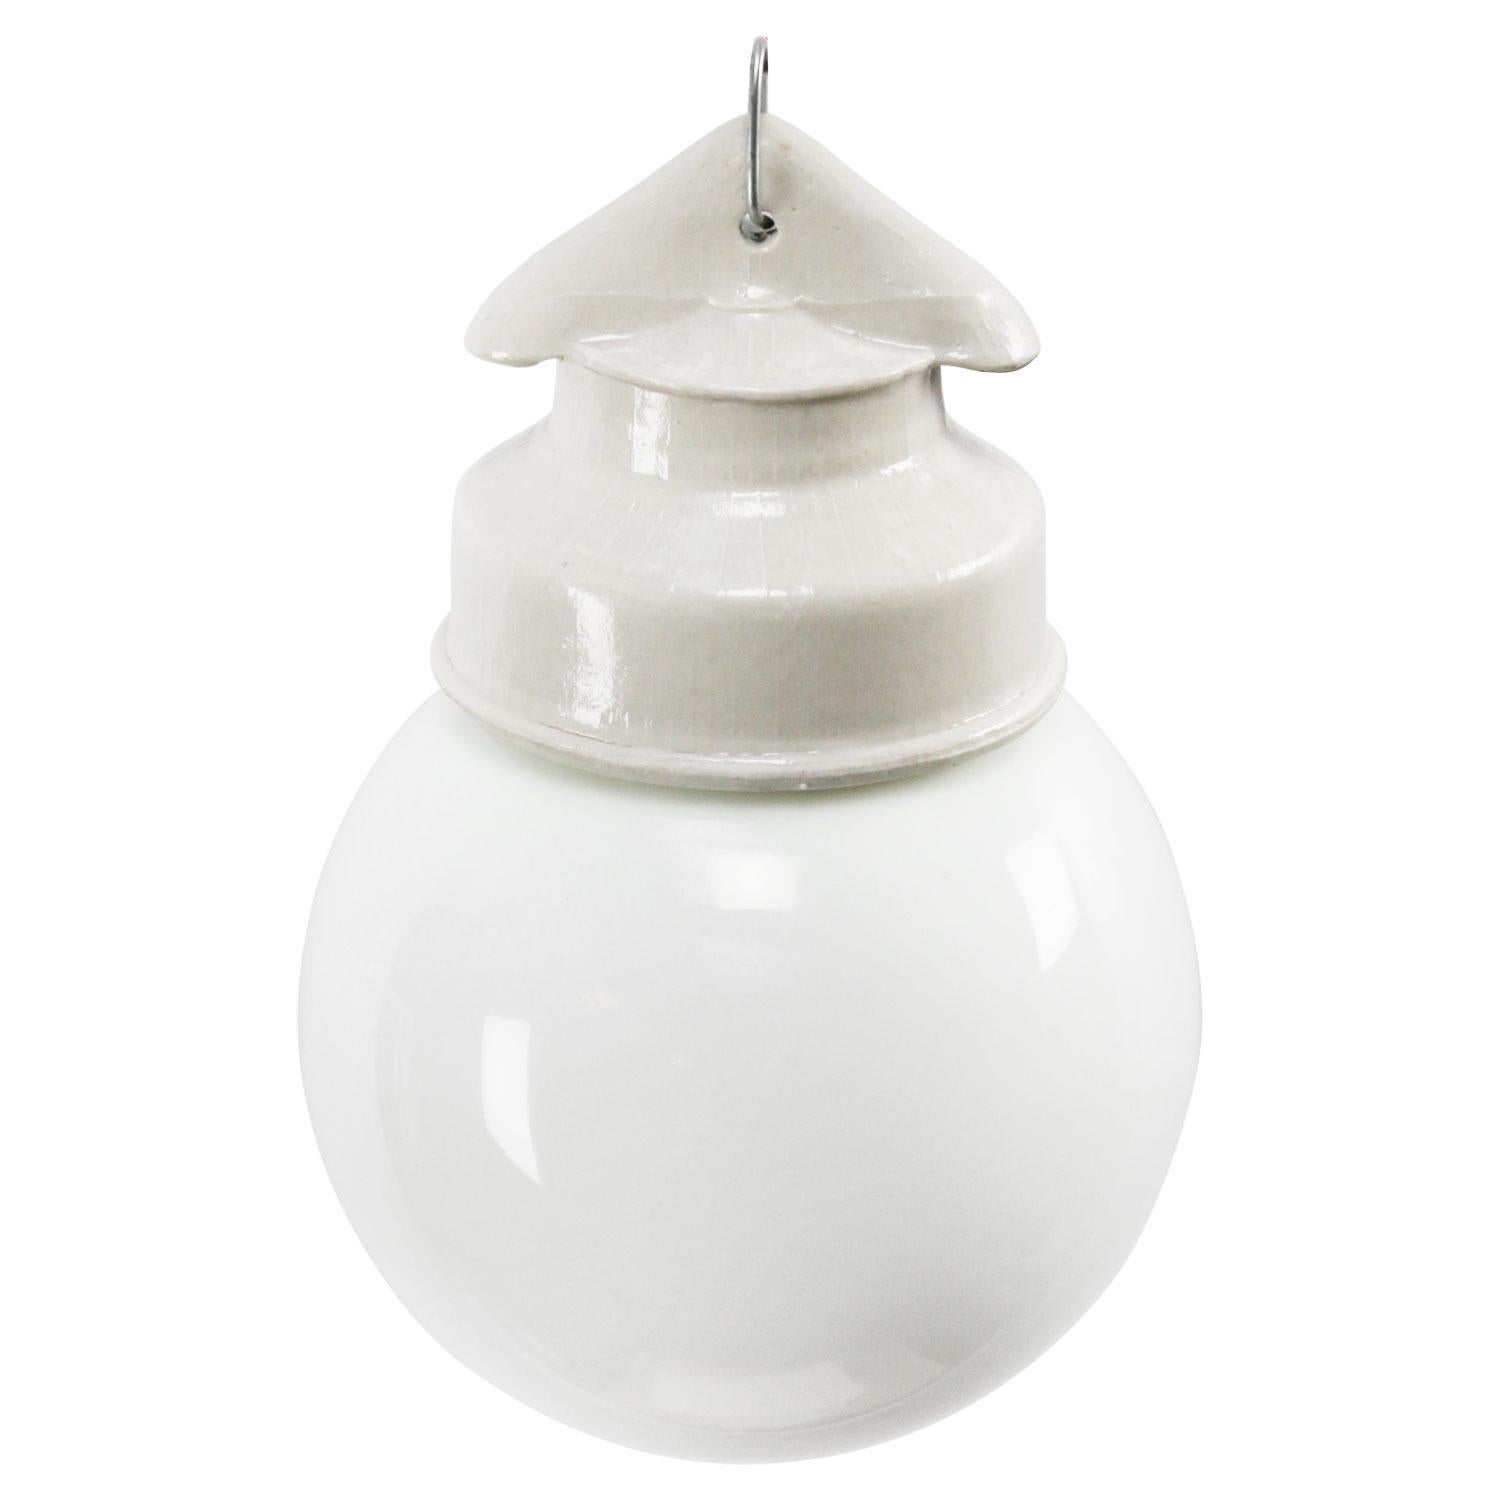 Industrial pendant.
White porcelain, opaline glass.
2 conductors, no ground.

Weight: 1.06 kg / 2.3 lb

Priced per individual item. All lamps have been made suitable by international standards for incandescent light bulbs, energy-efficient and